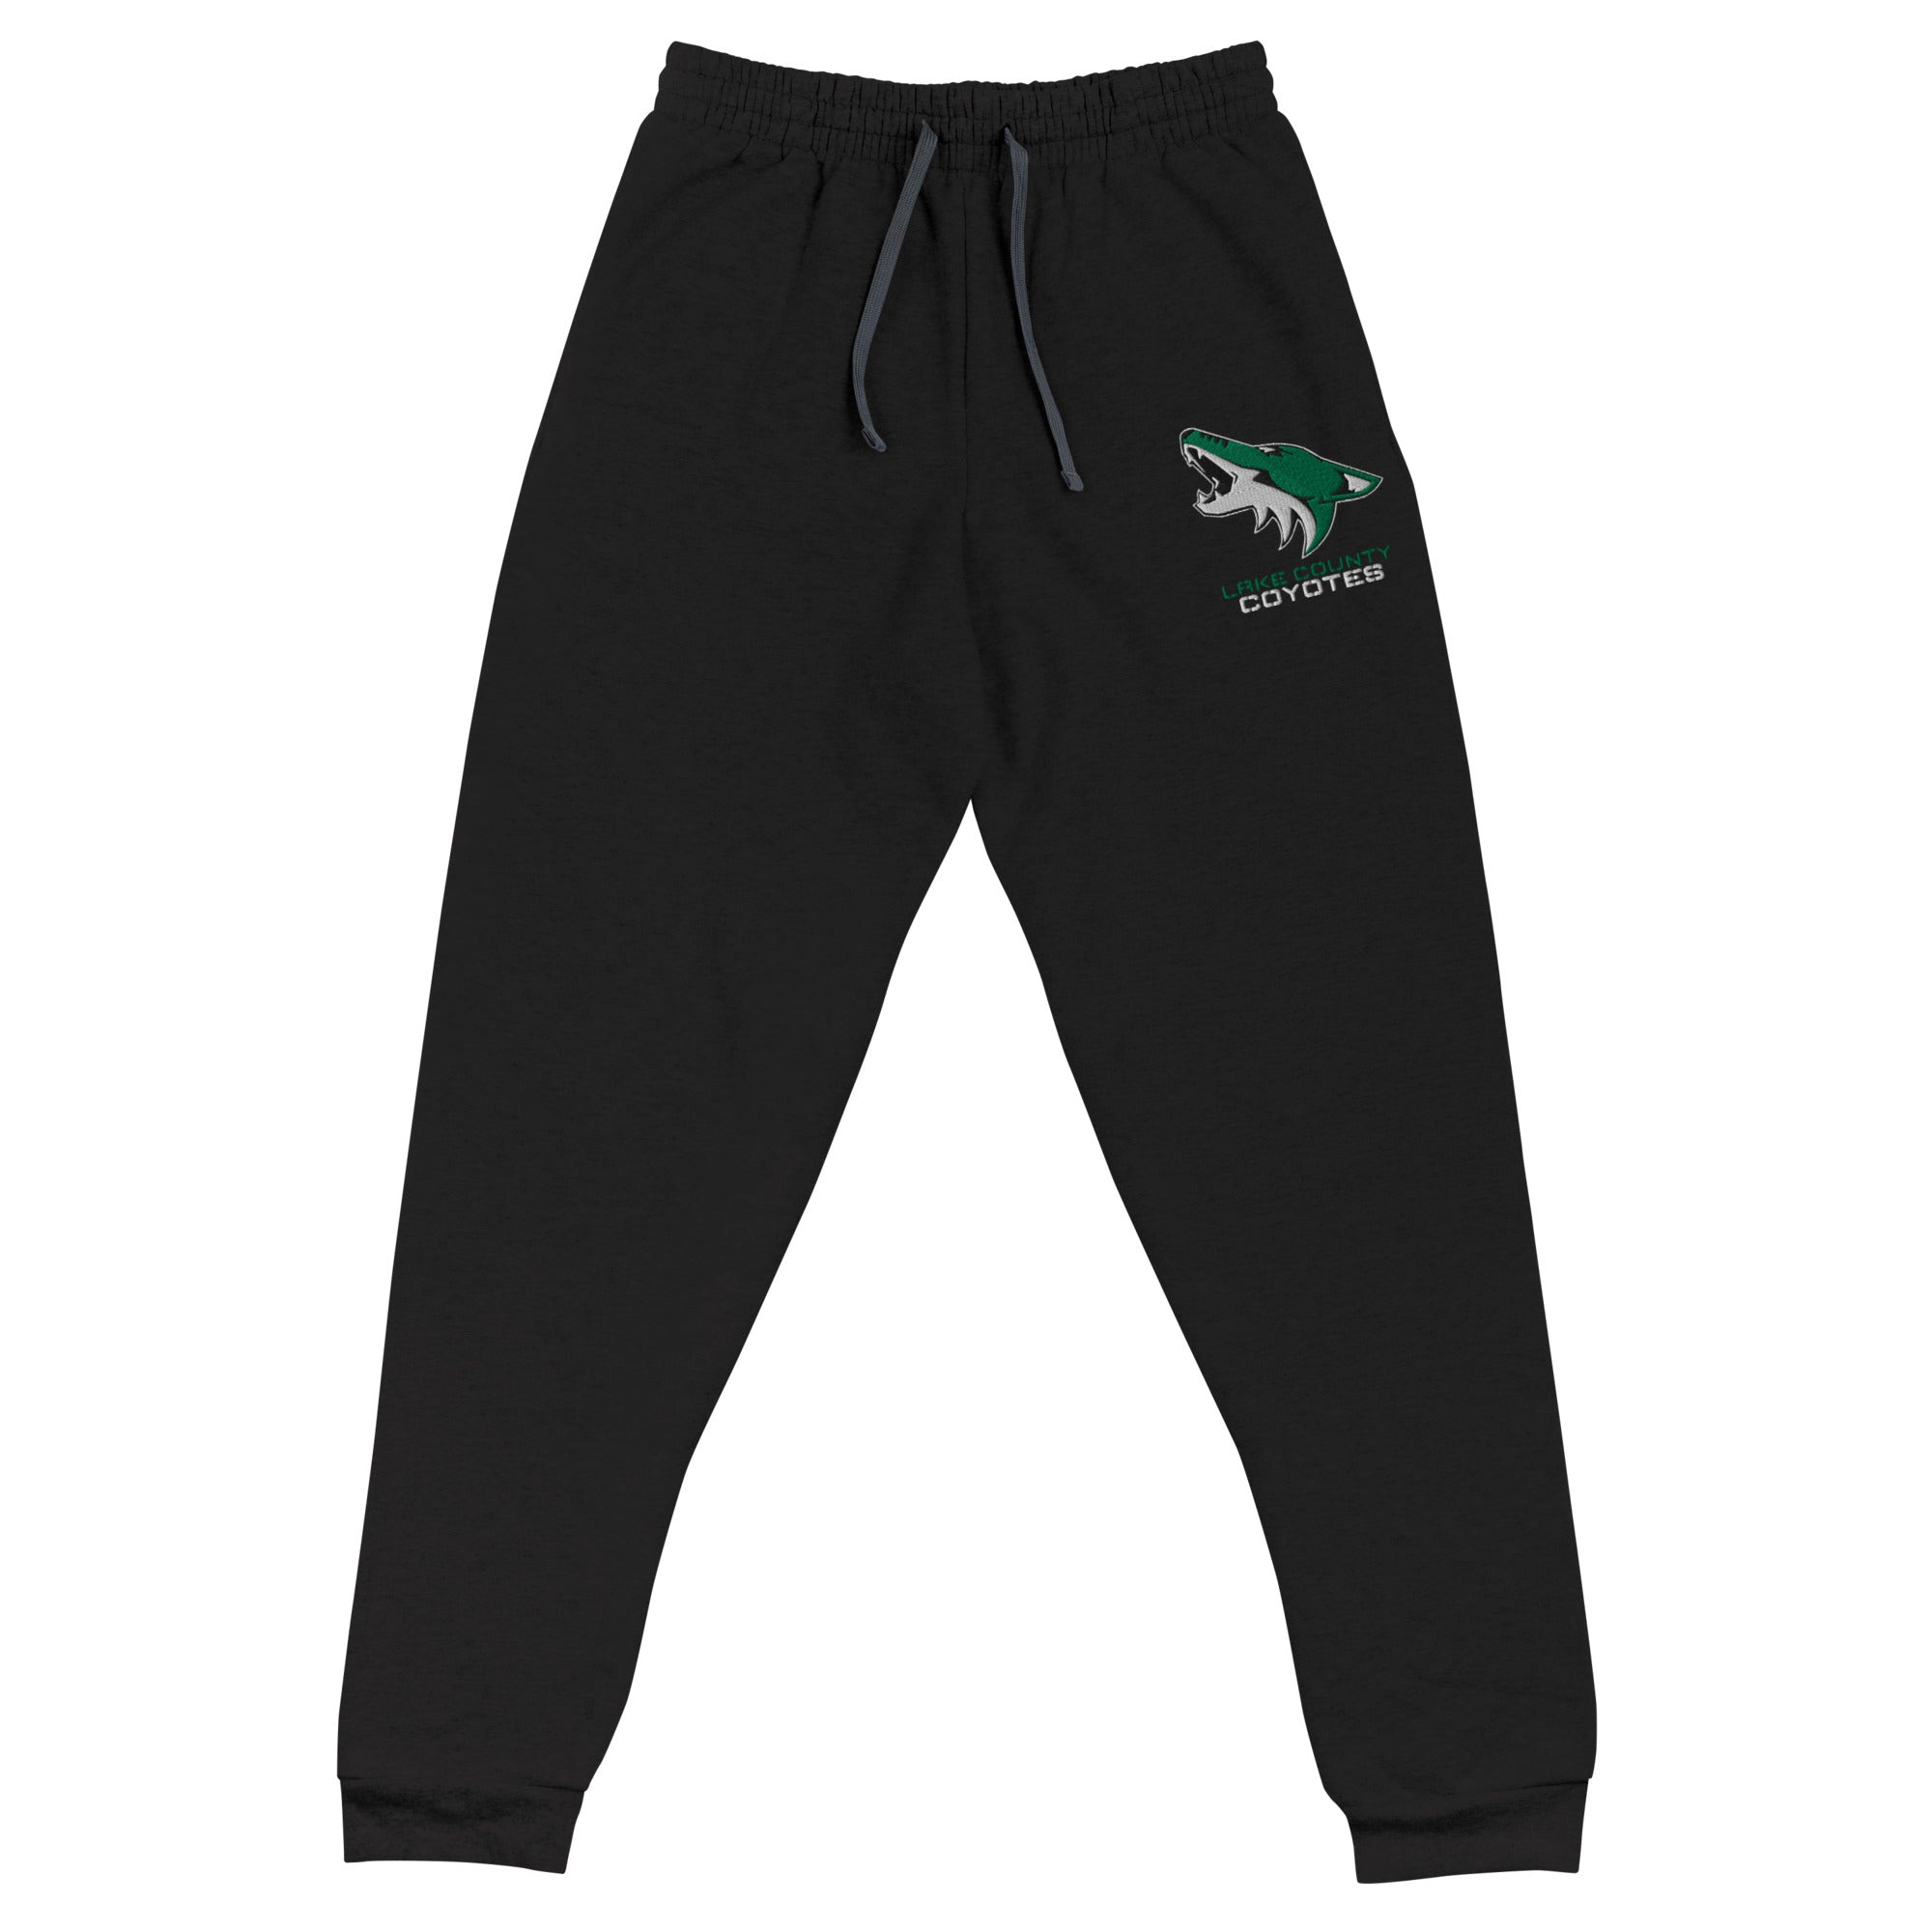 Rugby Imports Lake County Jogger Sweatpants